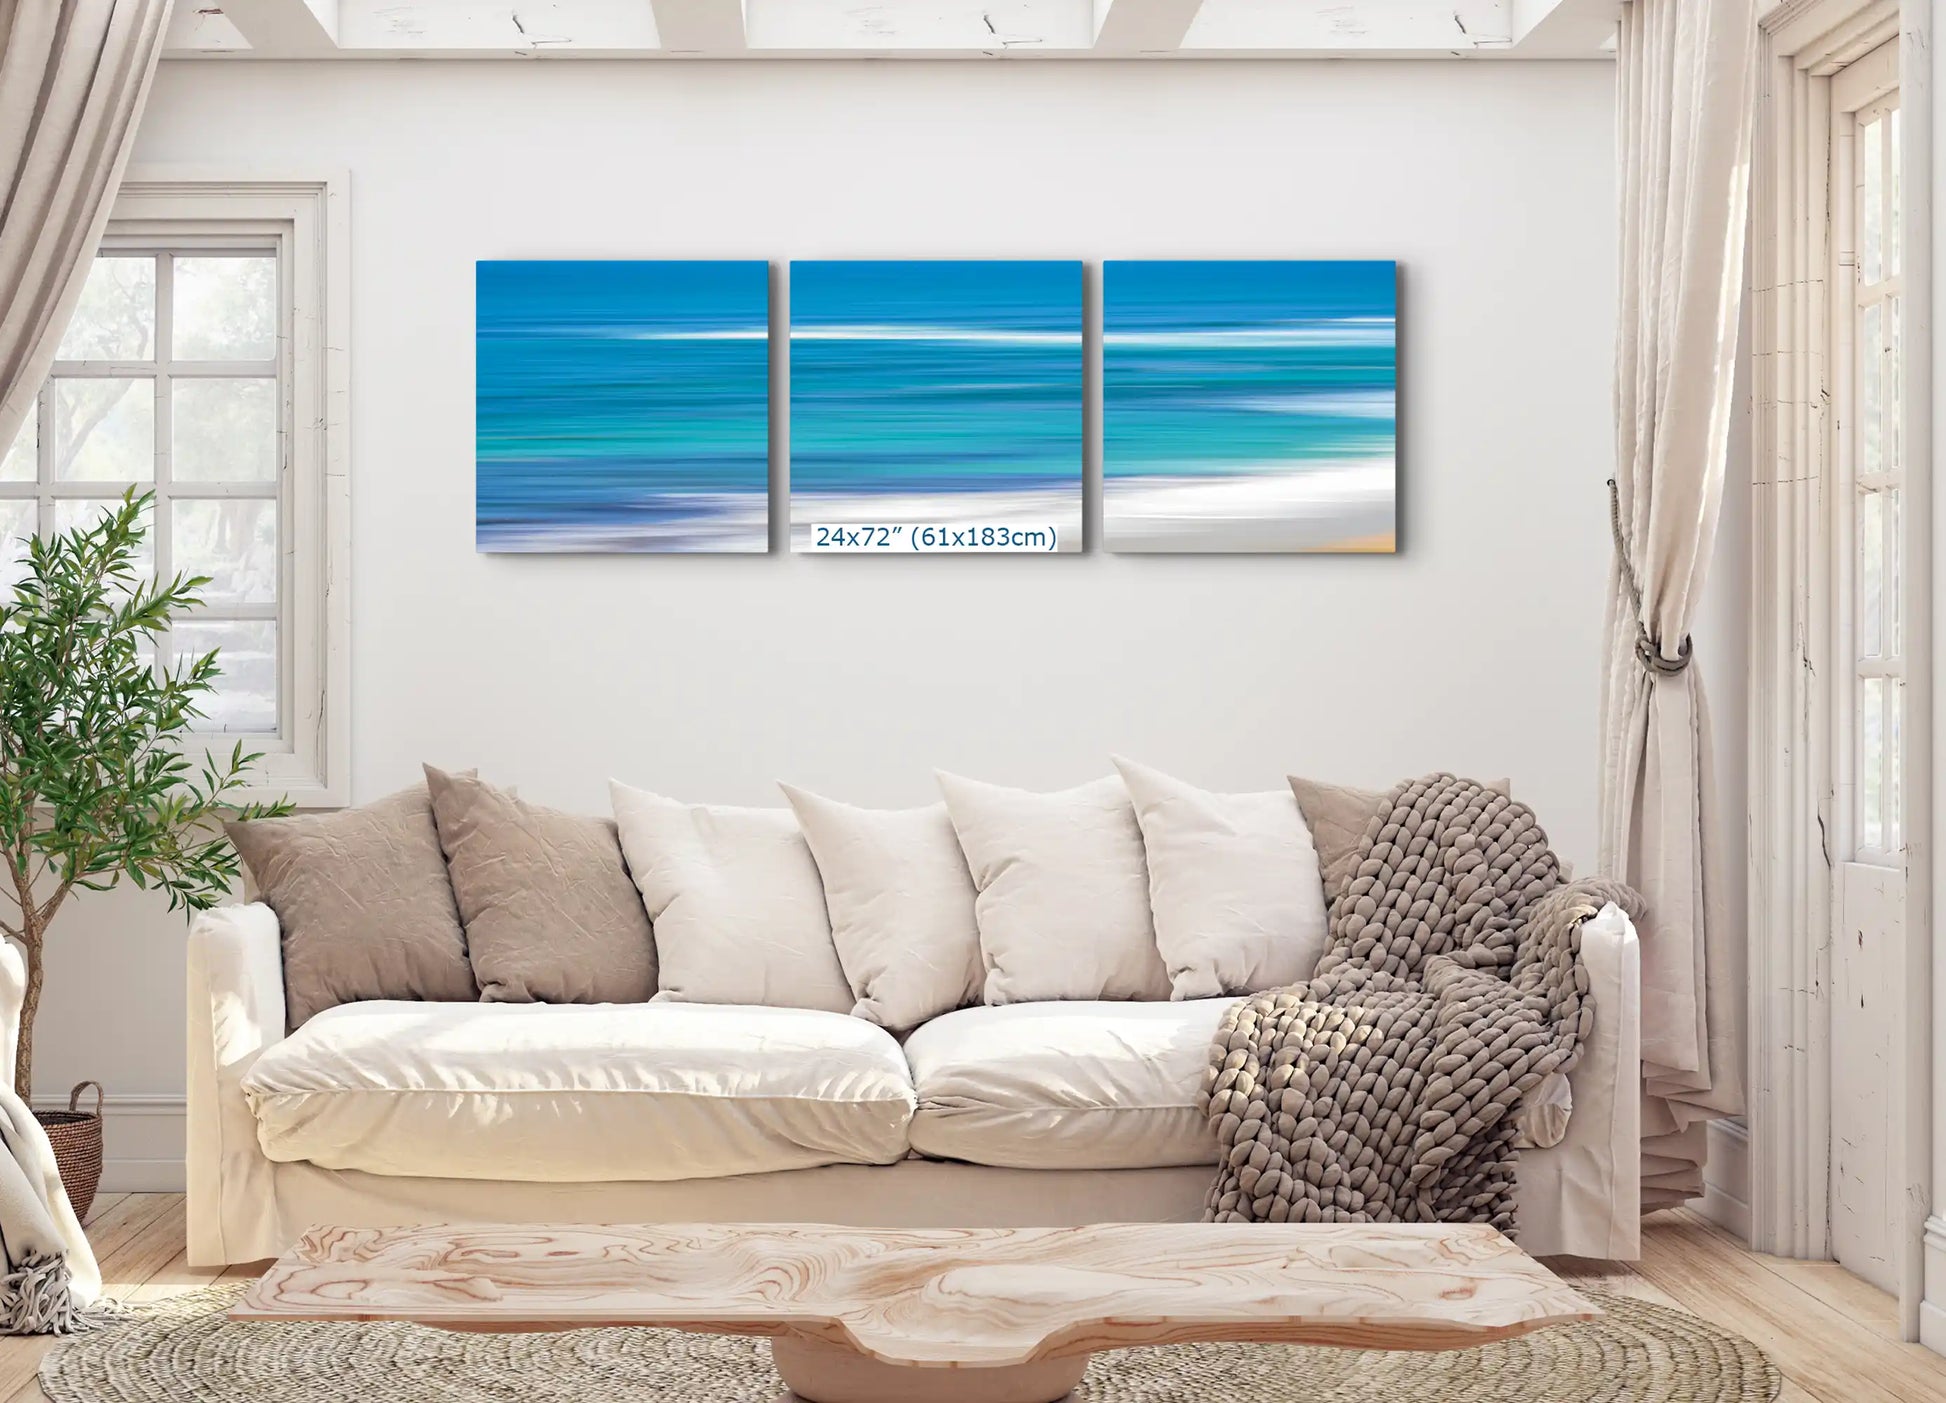 Blue Ocean abstract art in 3-piece canvas 24x72-inches over living room couch